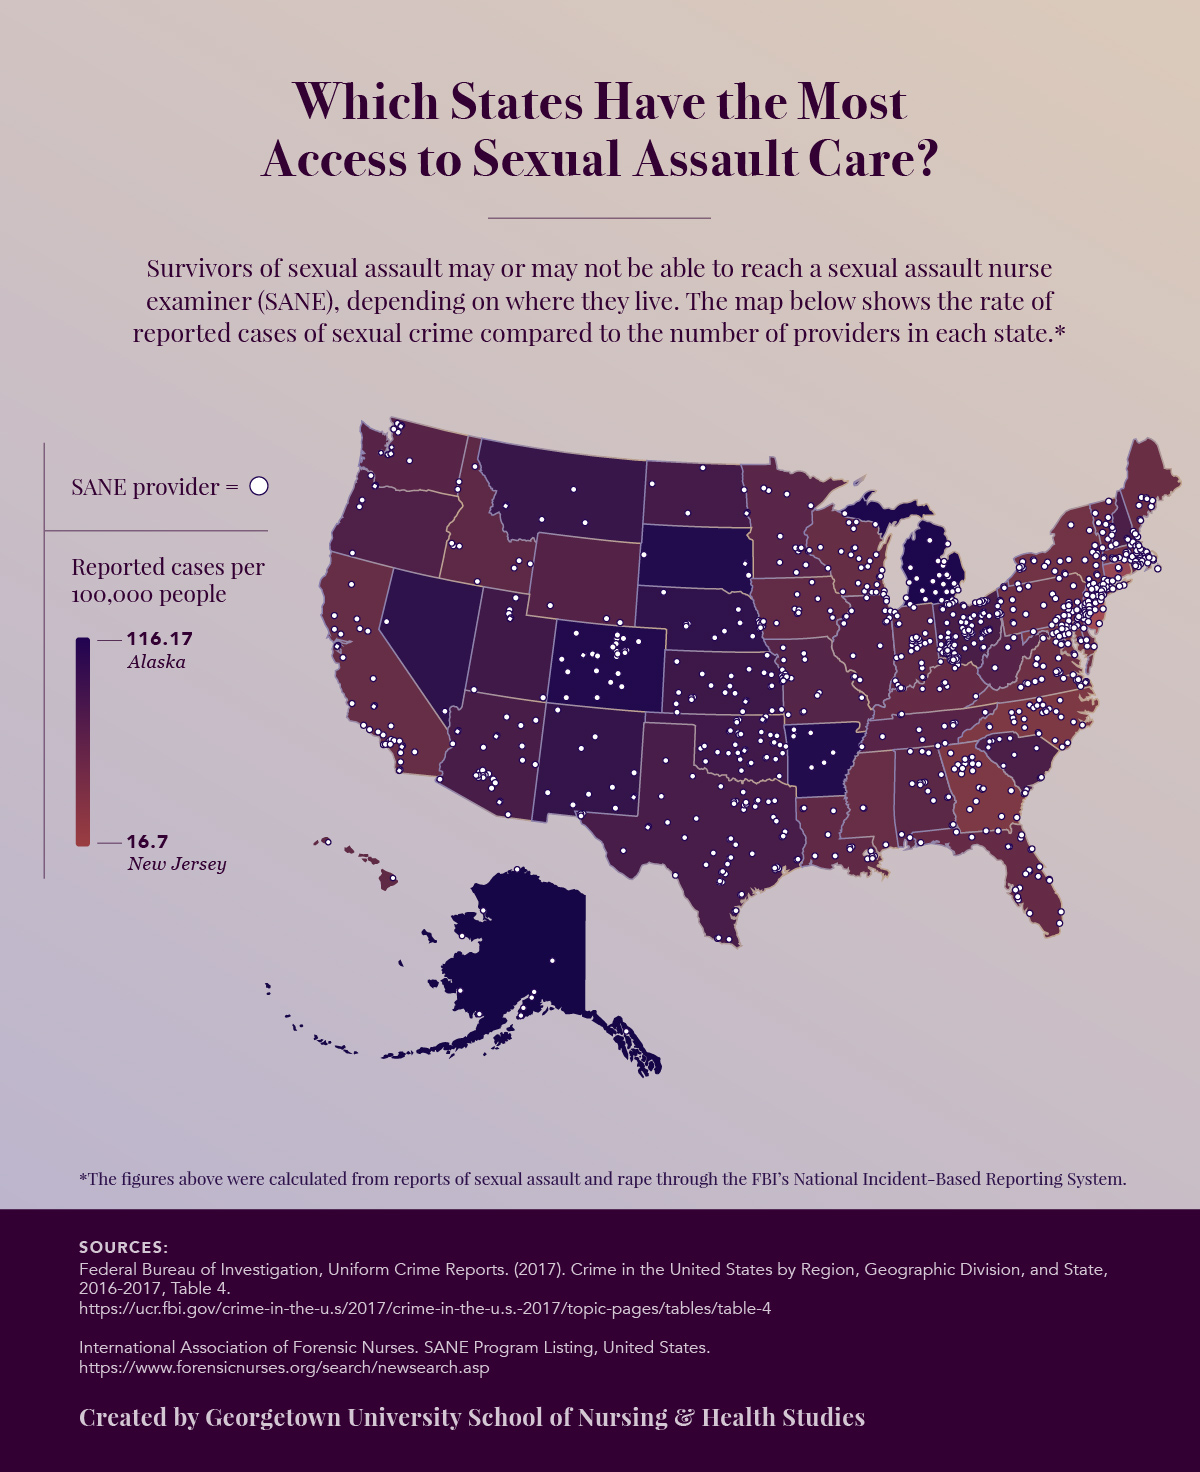 Map of the United States showing rates of sexual crime reports per 100,000 people and location of SANE providers.